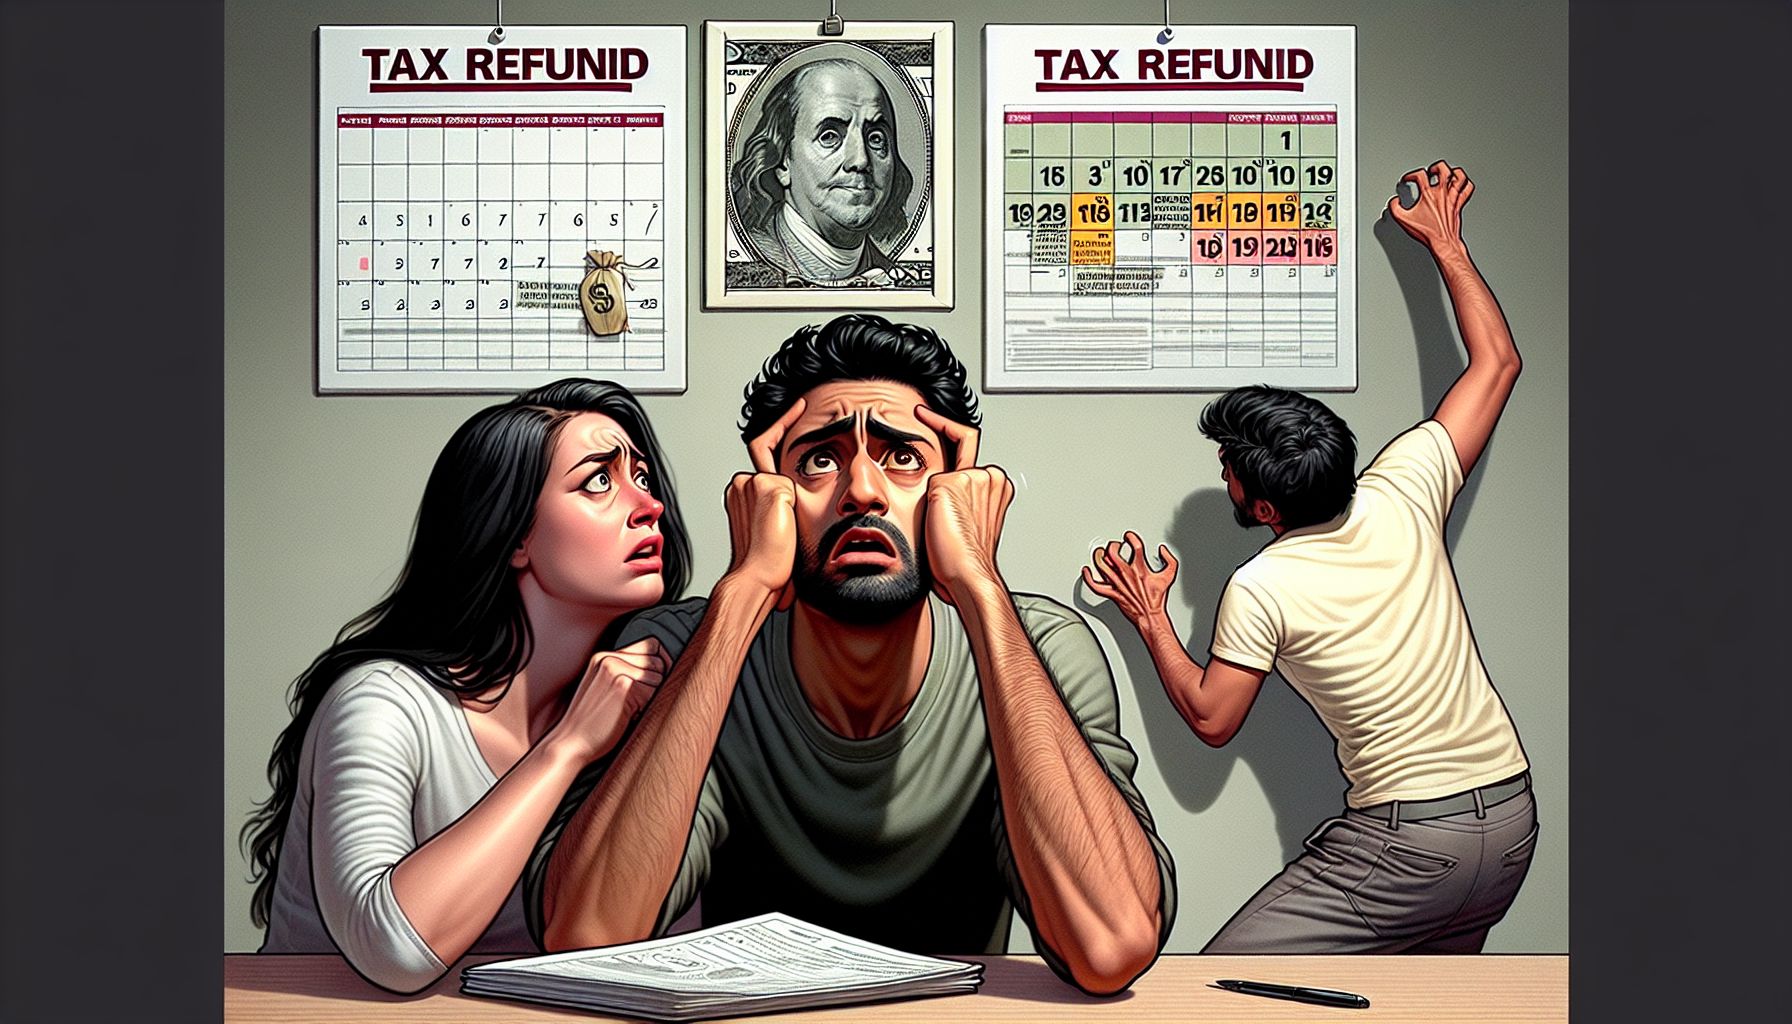 How Long Is Too Long To Wait For Tax Refund?